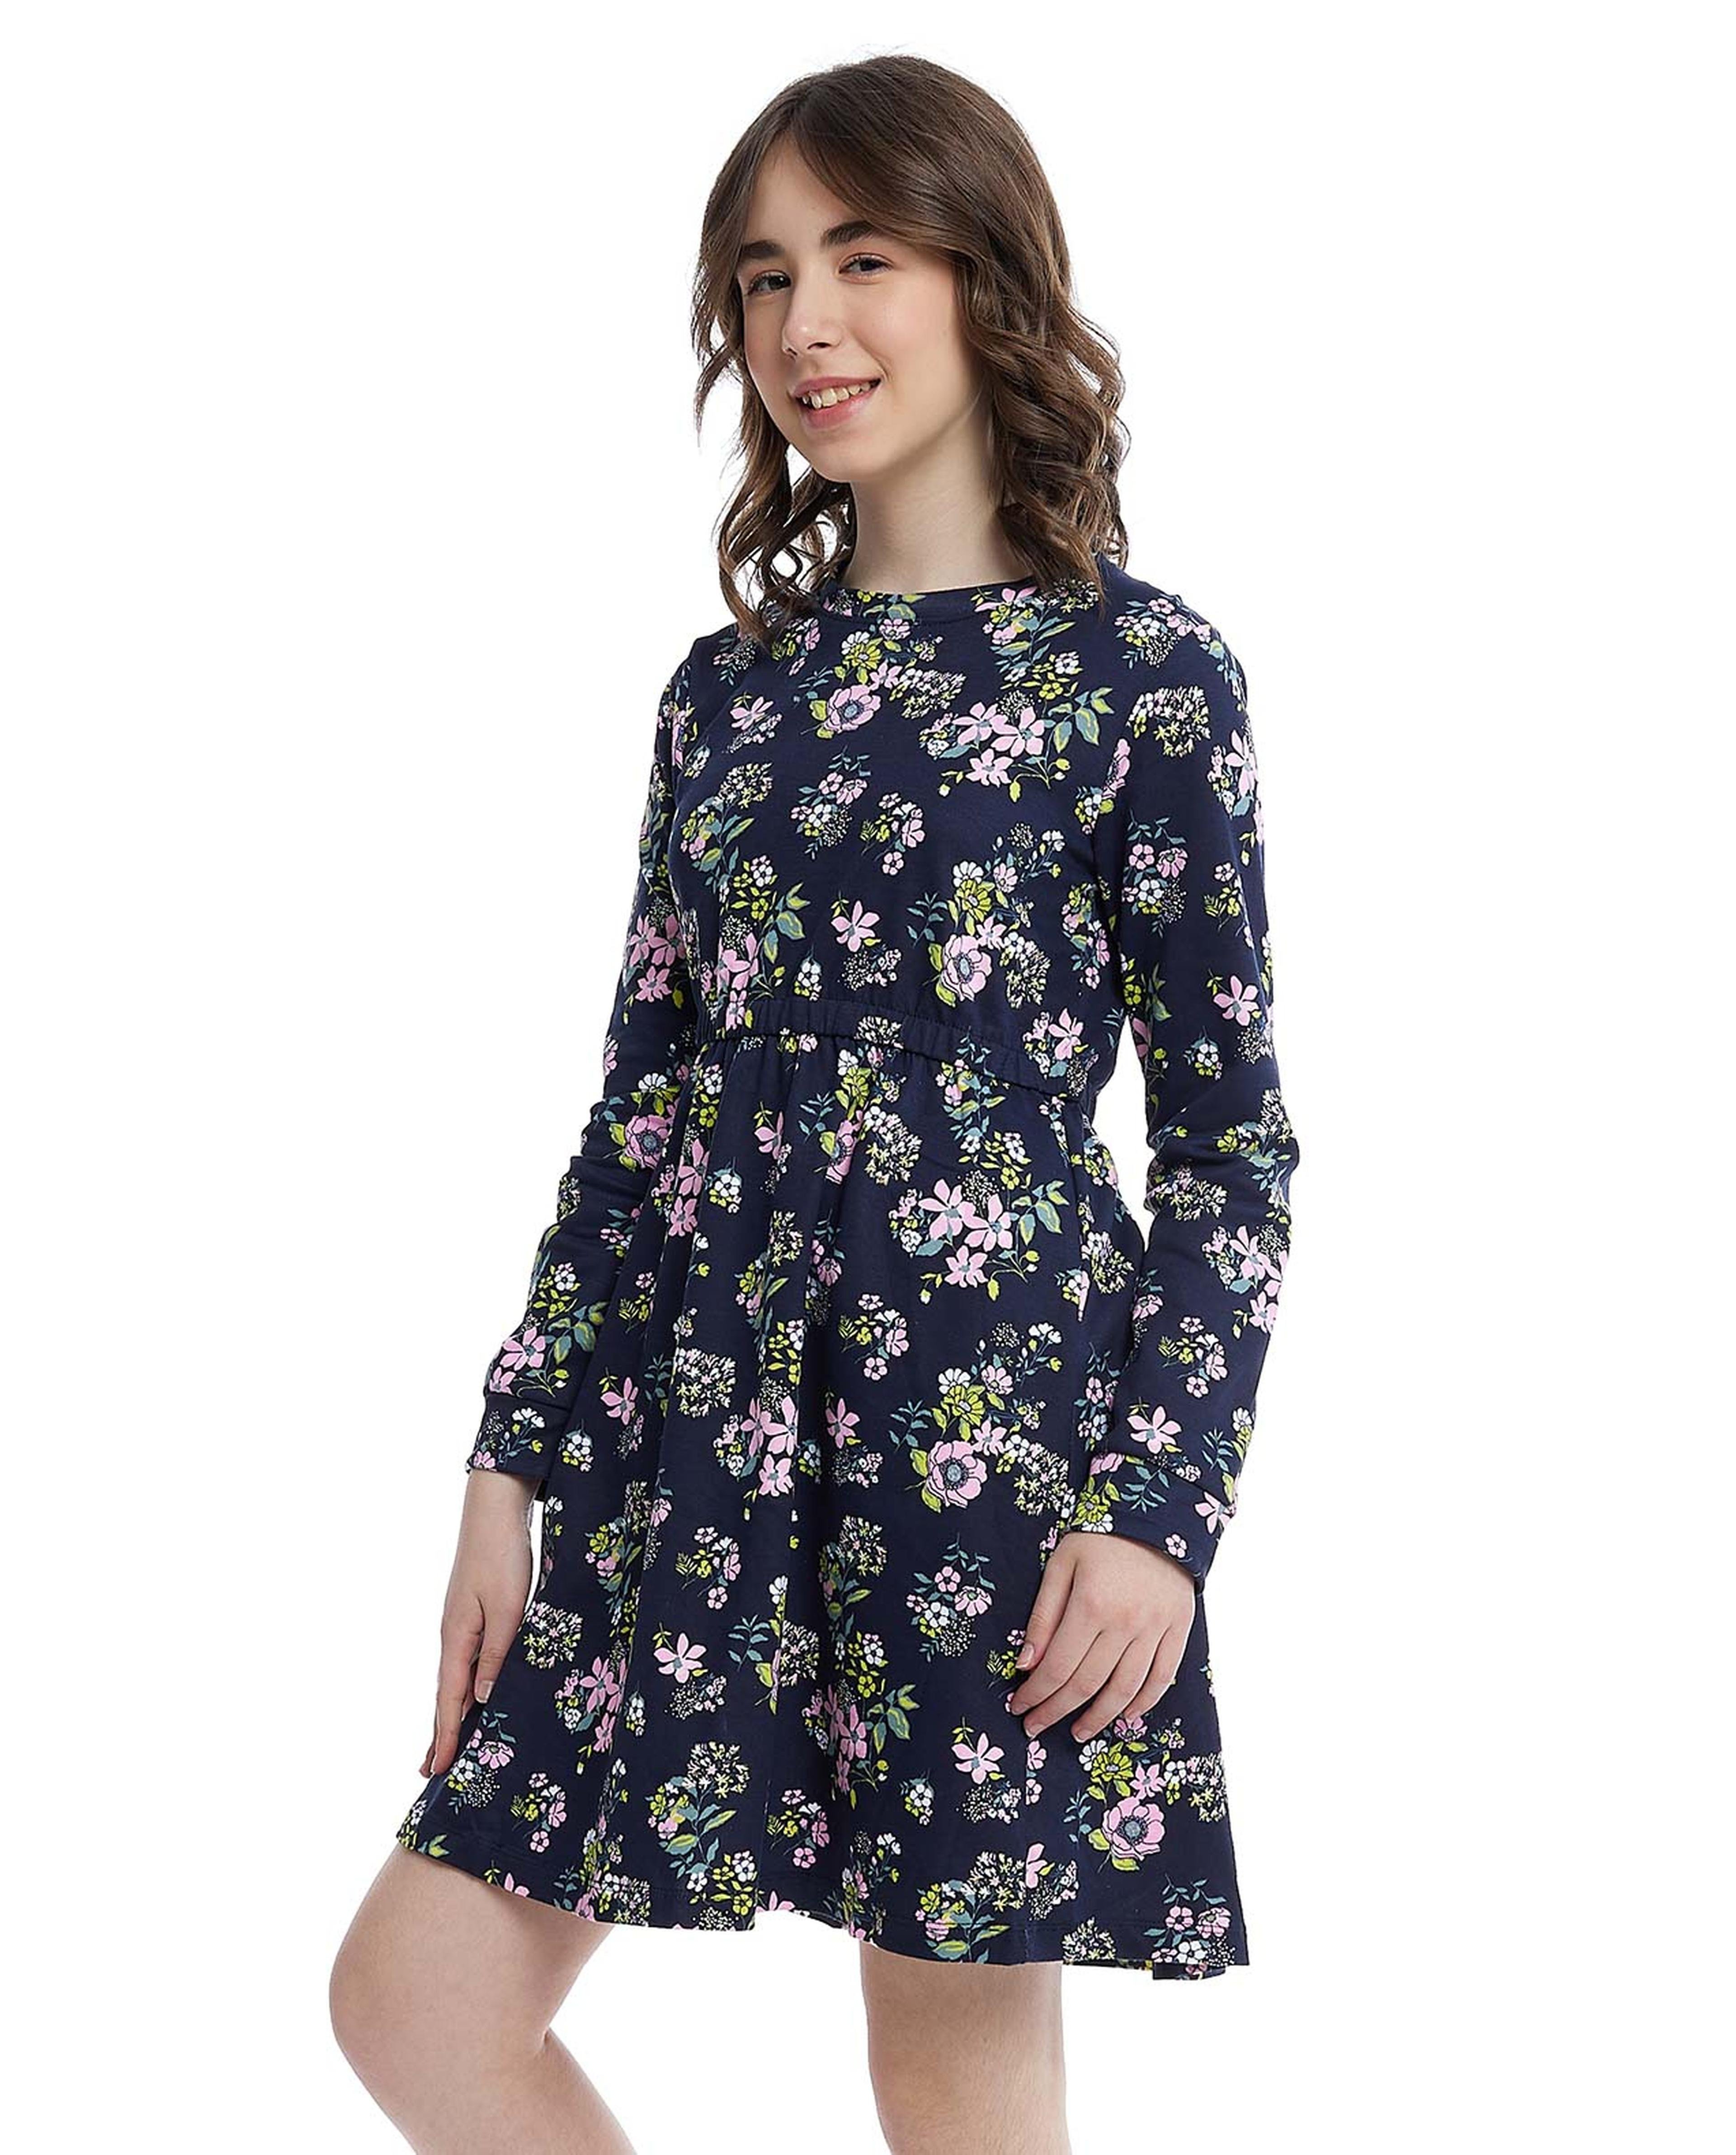 Floral Print Mini Dress with Long Sleeves